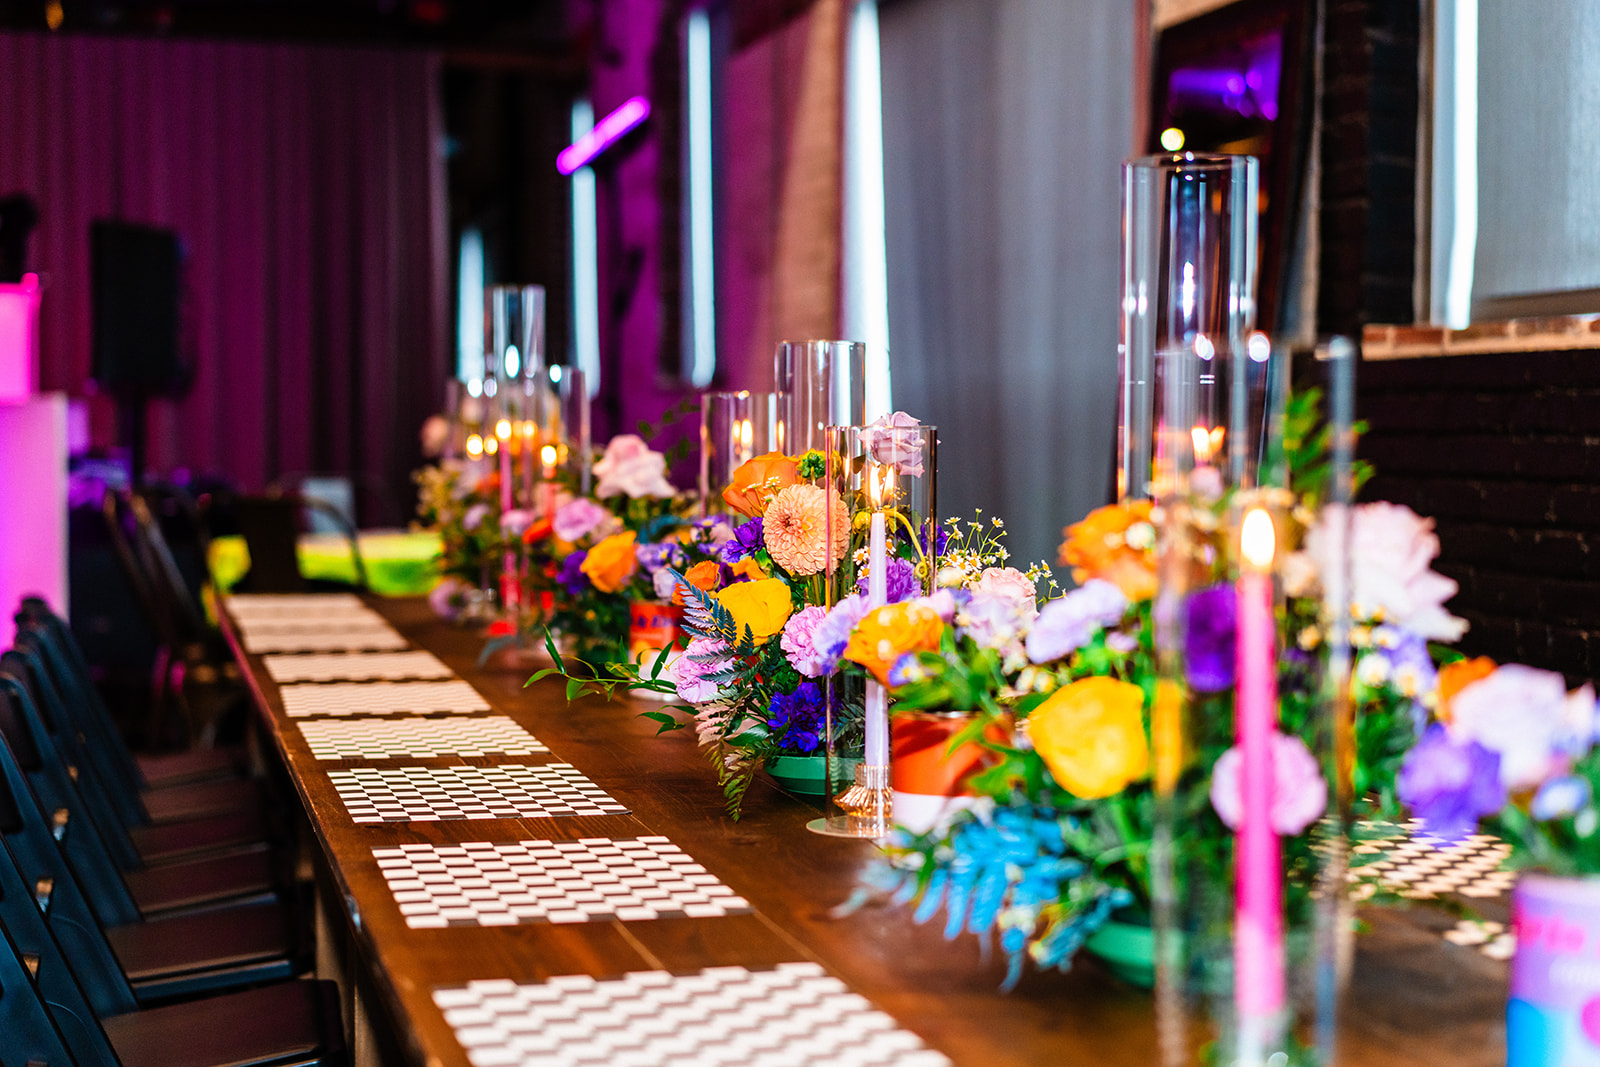 Stunning wedding tablescape with colorful florals and decor